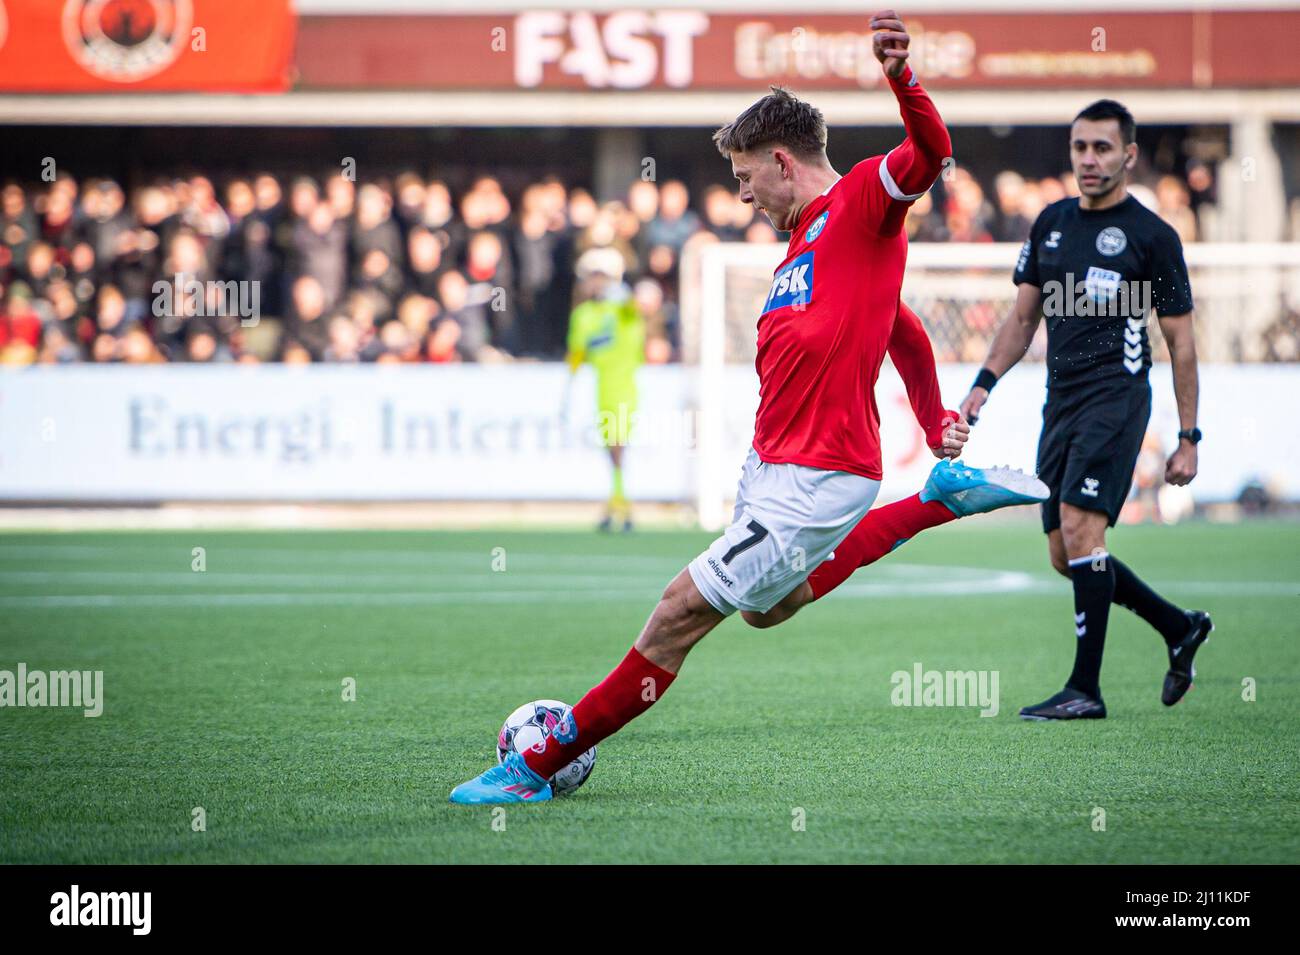 Silkeborg, Denmark. 20th, March 2022. Nicolai Vallys (7) of Silkeborg IF seen during the 3F Superliga match between Silkeborg IF and FC Midtjylland at Jysk Park in Silkeborg. (Photo credit: Gonzales Photo - Morten Kjaer). Stock Photo